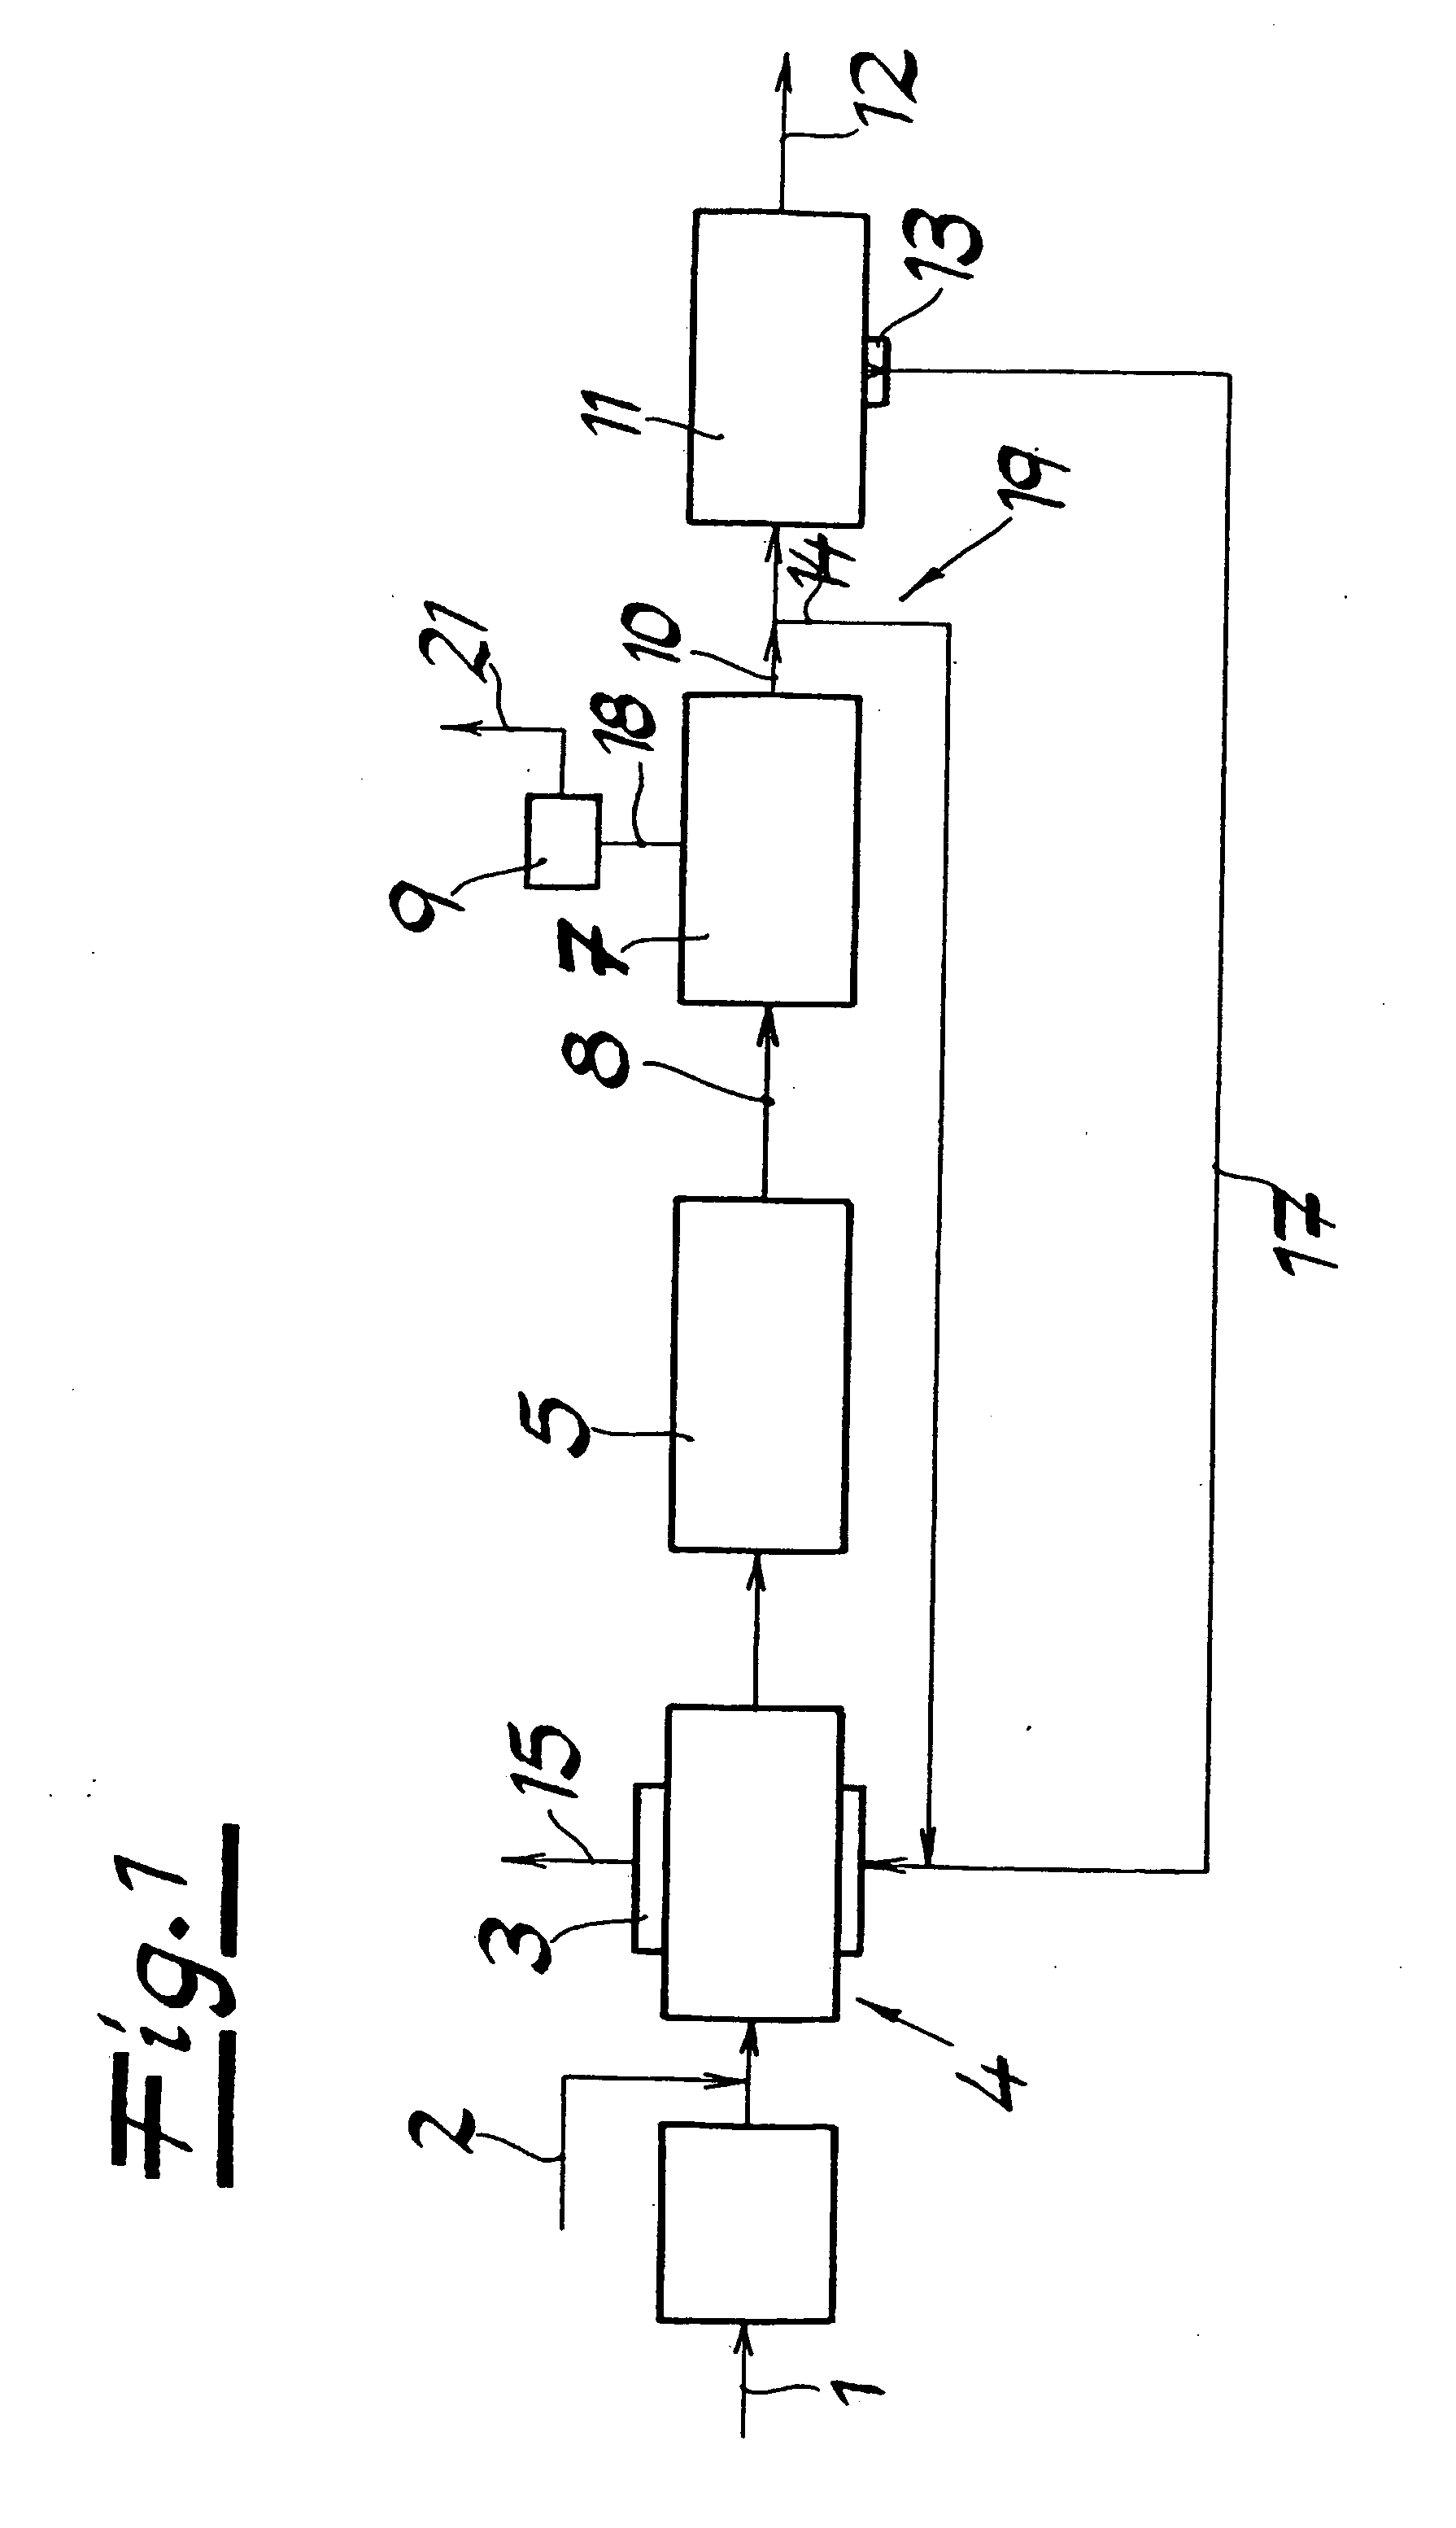 System for extracting hydrogen from a gas containing methane